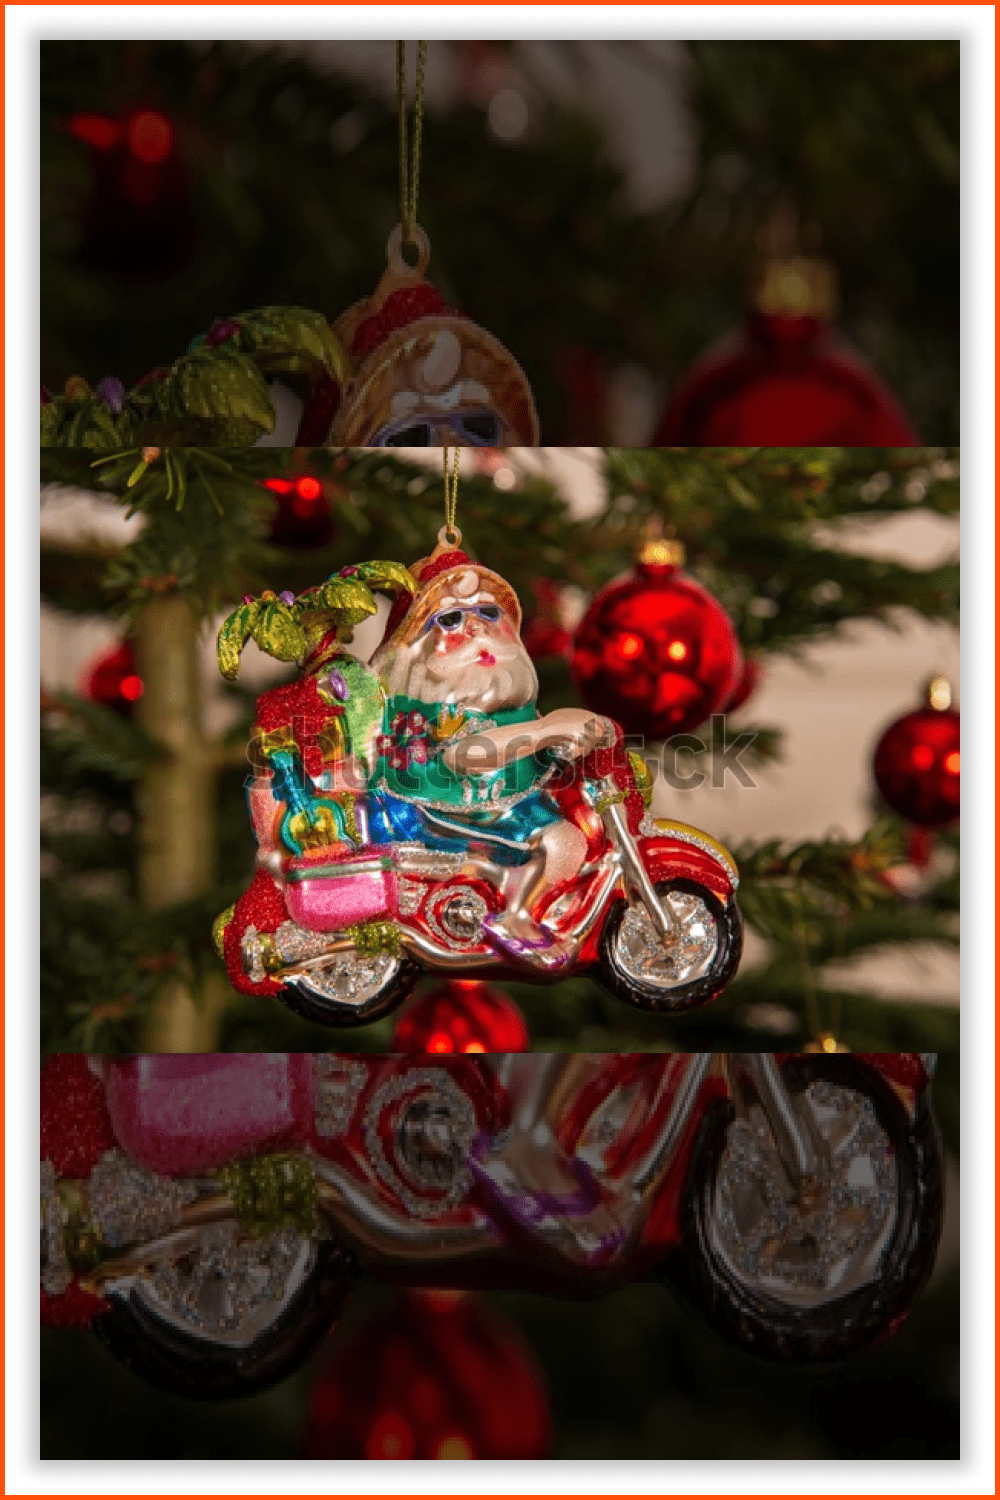 Photo of a Christmas toy in the shape of Santa Claus in summer clothes on a motorcycle.